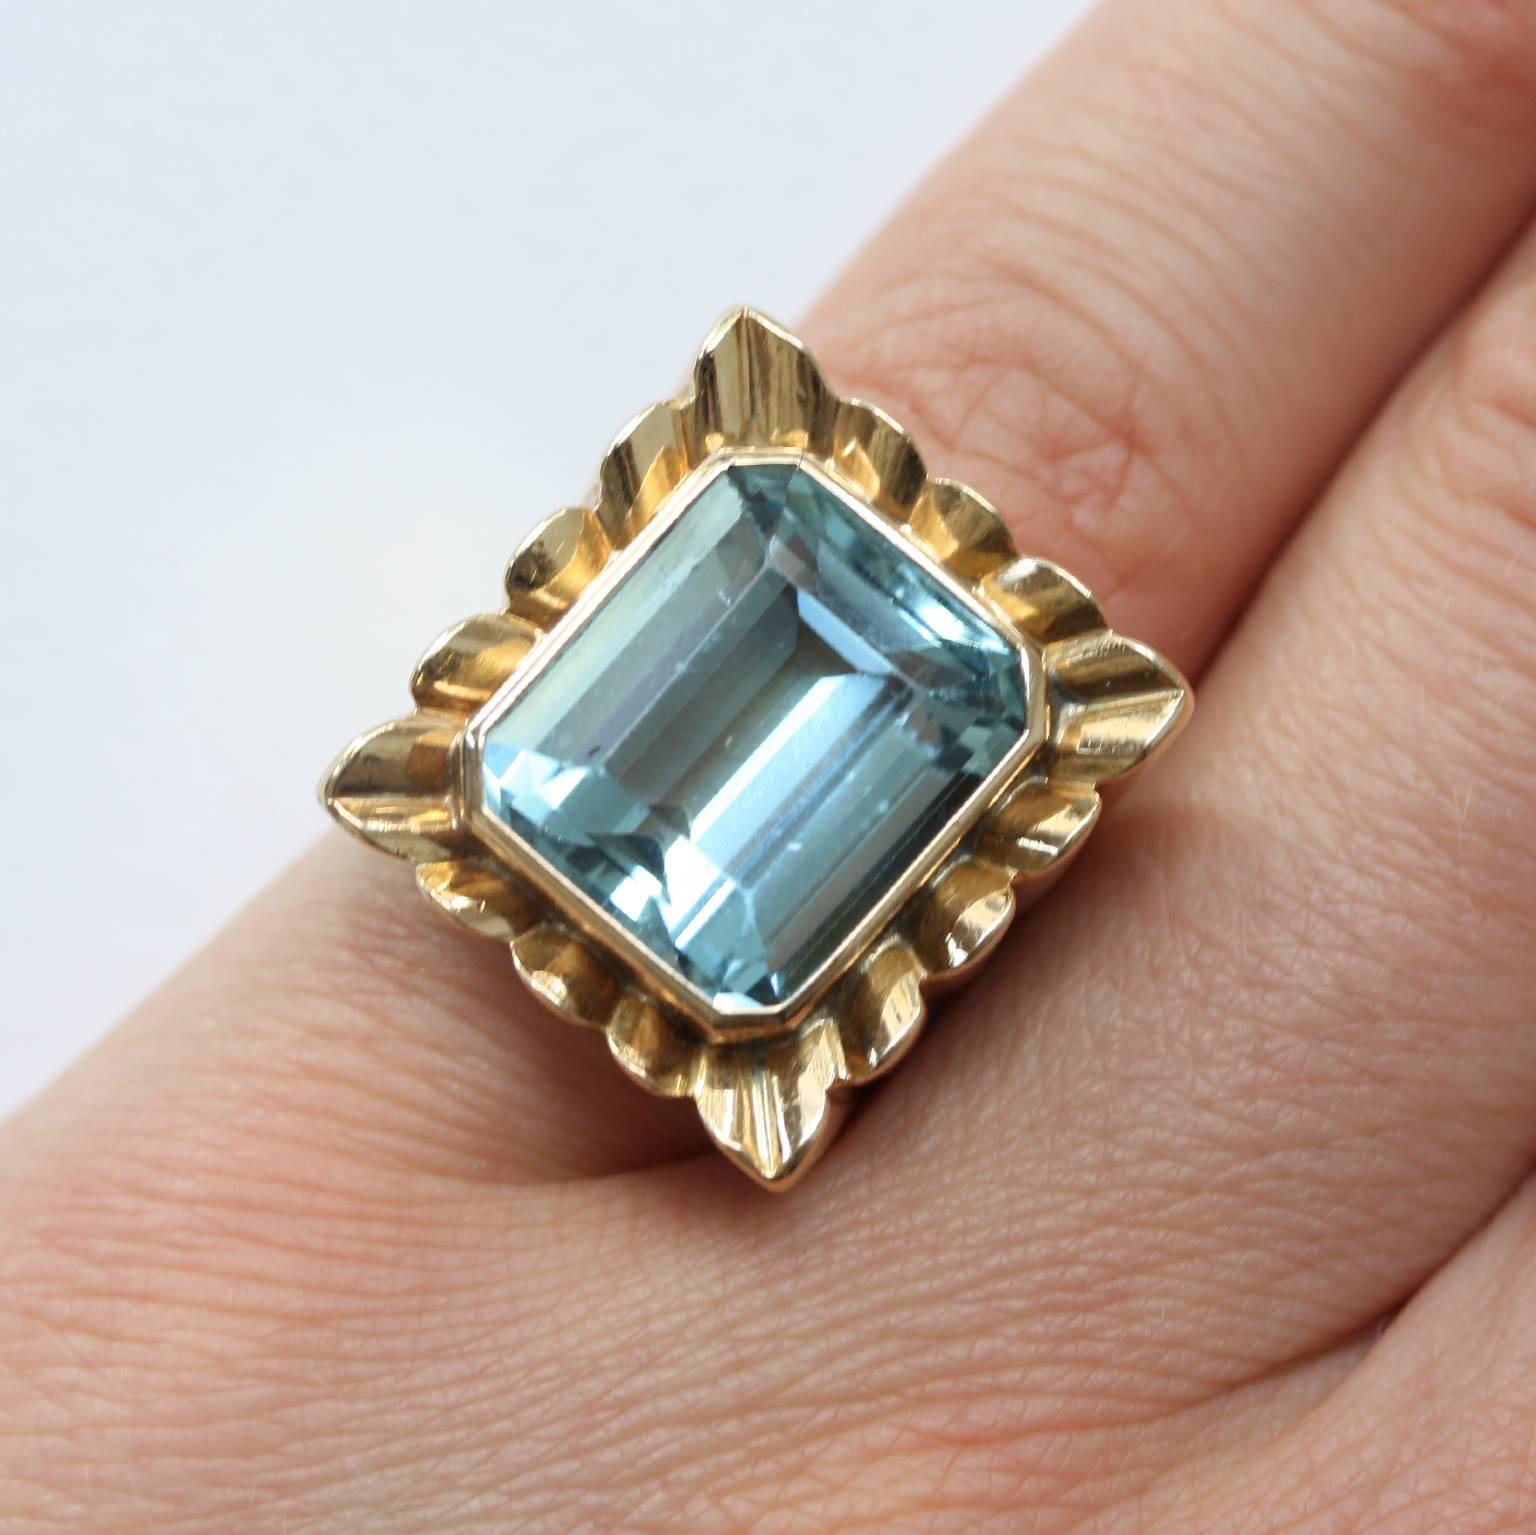 An 18 carat gold reactangular ring set with a large emerald cut aquamarine and a striped gold shank, French master mark, France, circa 1950.

weight: 14.5 grams
ring size; 16 mm. 5 1/4 US.
dimensions 1.9 x 1.8 cm.